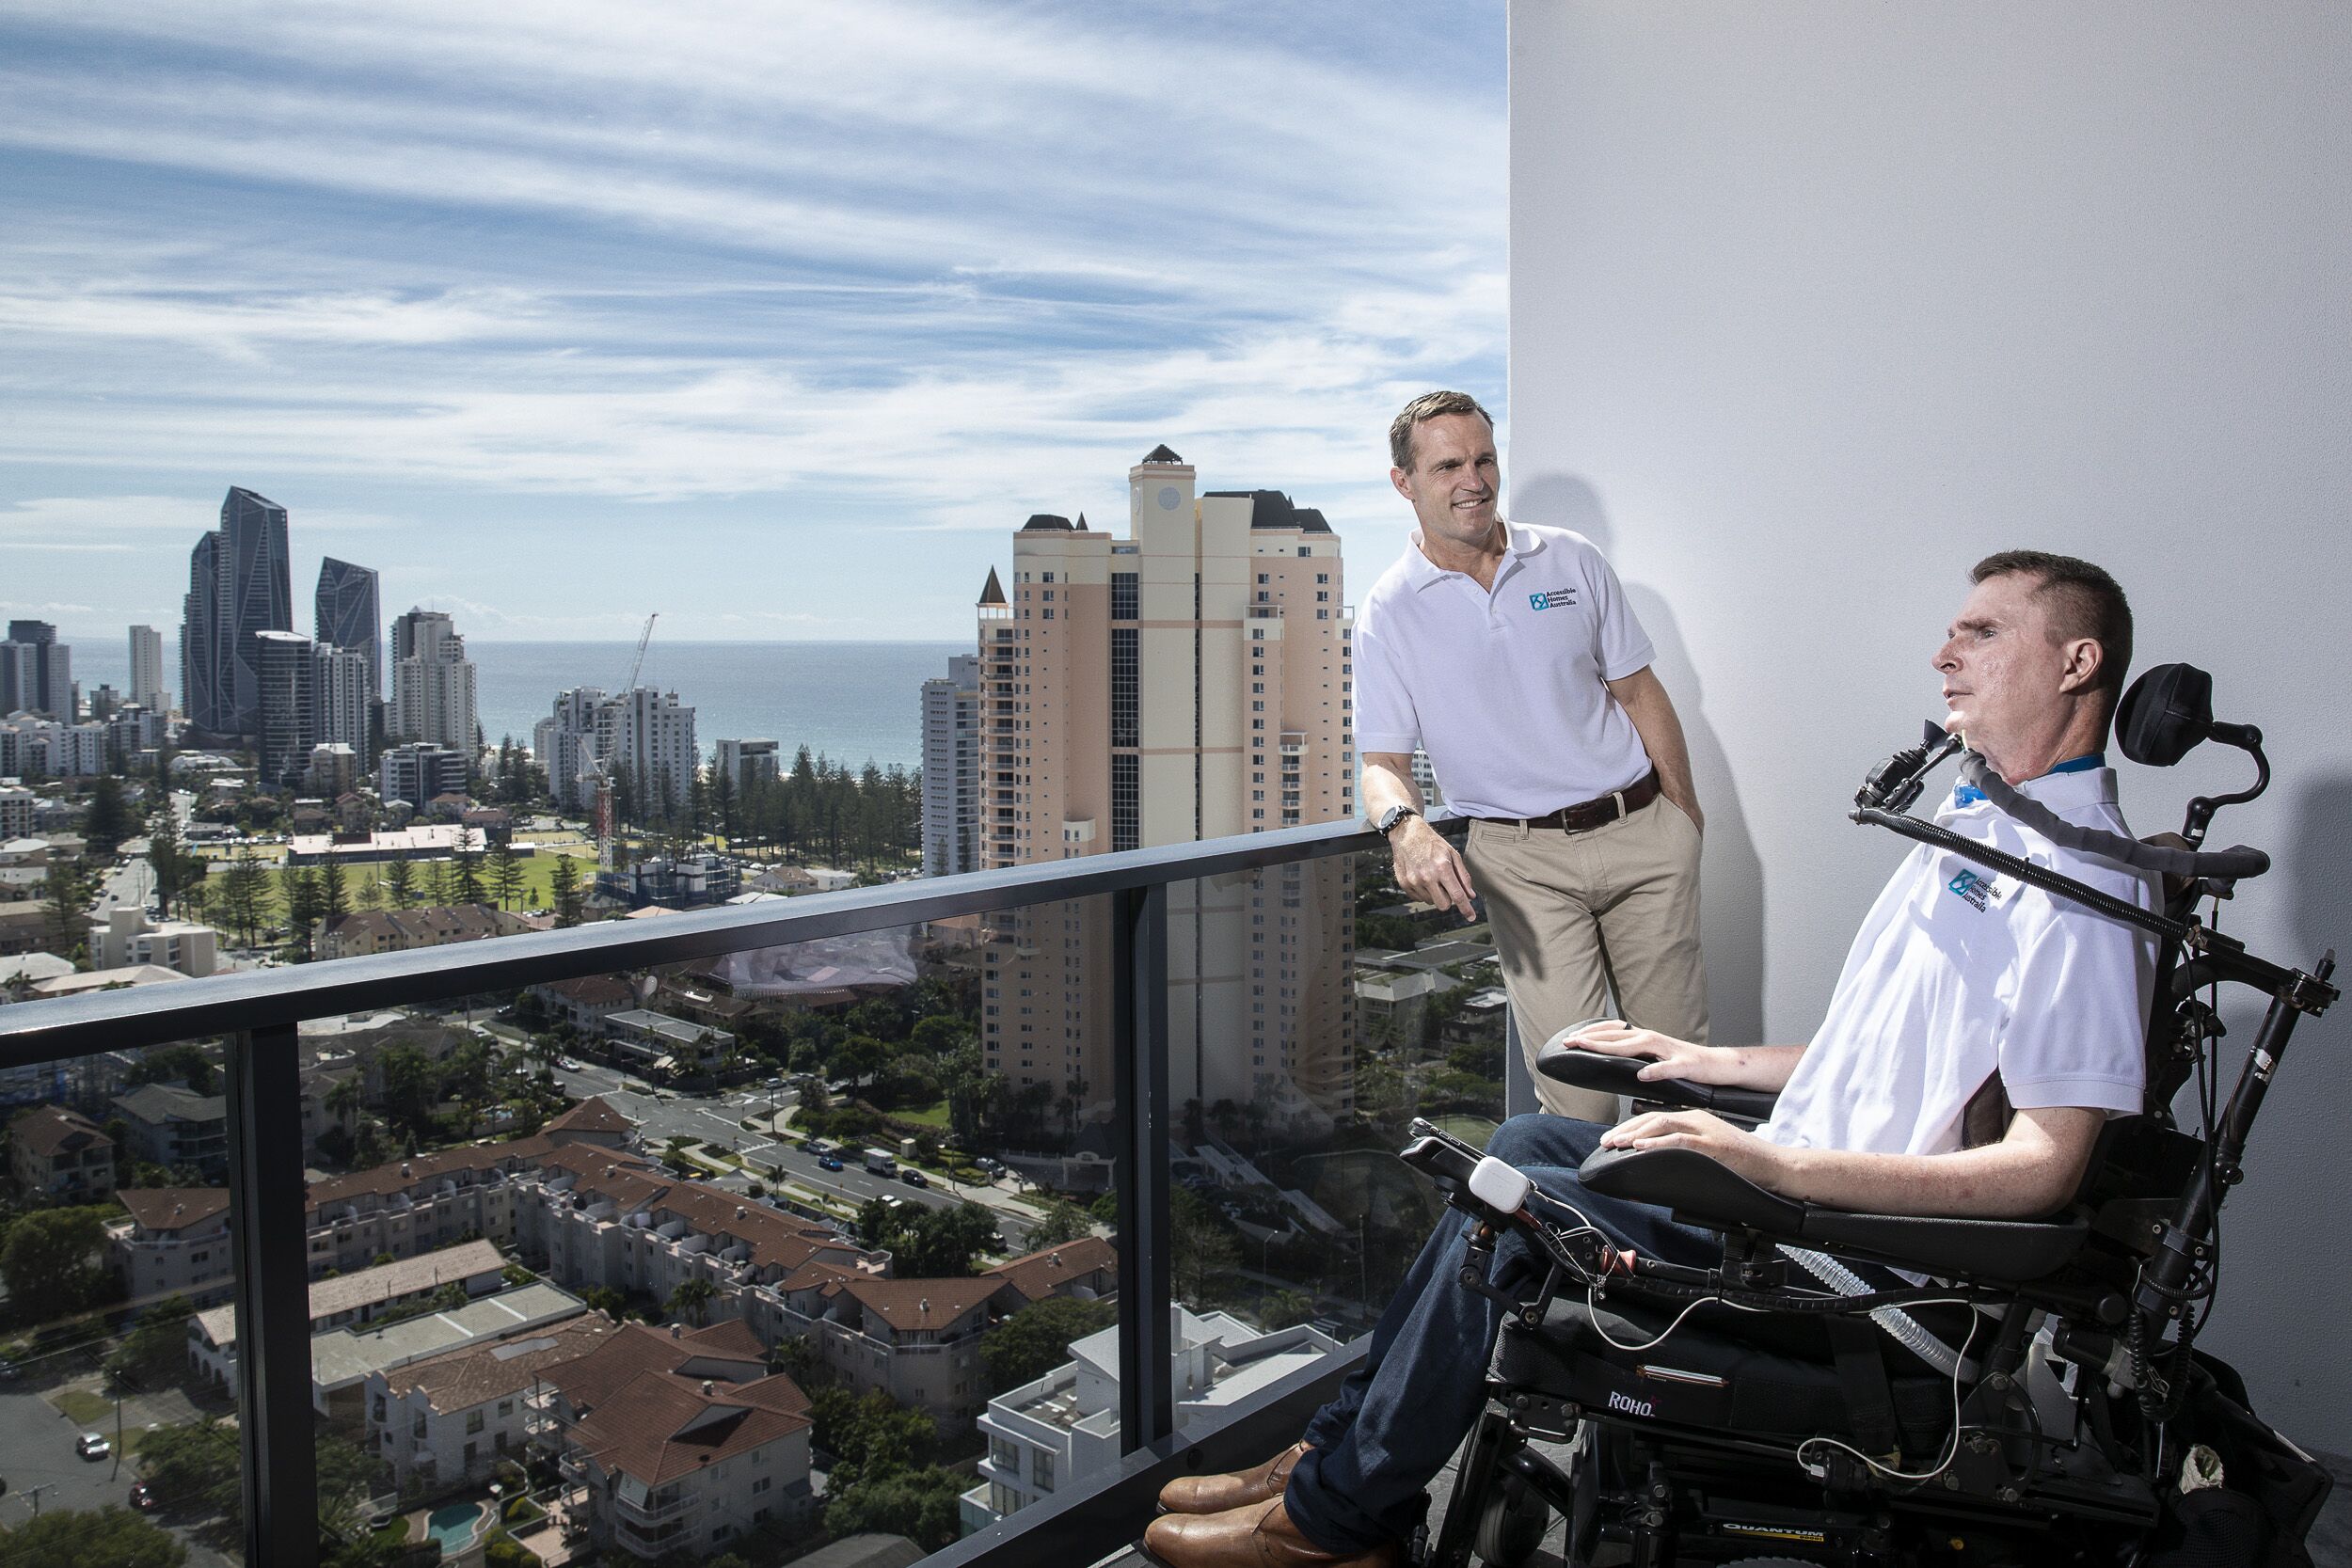 One man standing and one man sitting in a wheelchair on a balcony